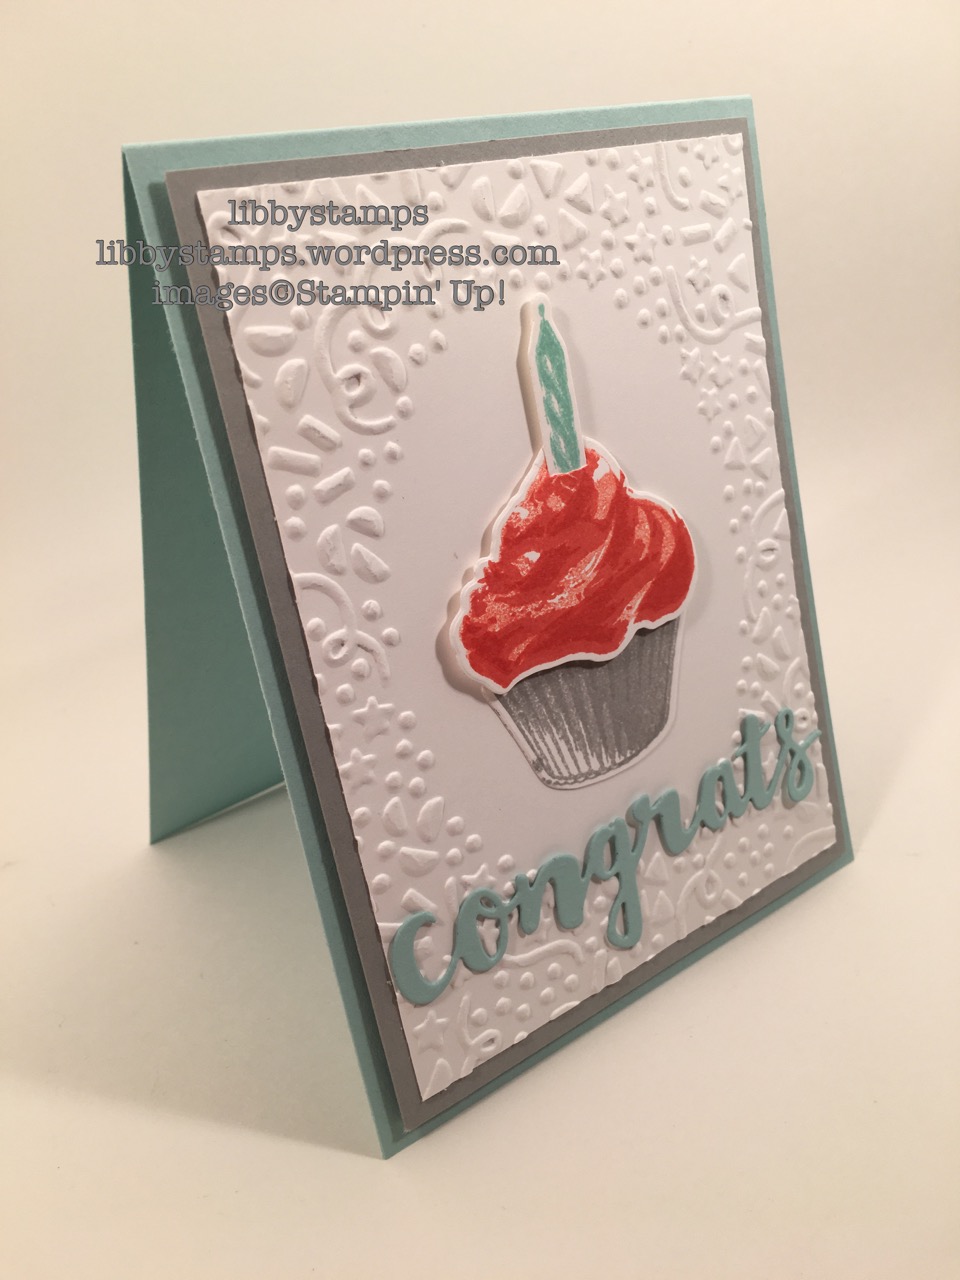 libbystamps, stampin up, Sunshine Wishes Thinlits, Confetti EF, Sweet Cupcake, Cupcake Cutouts Framelits, CCMC